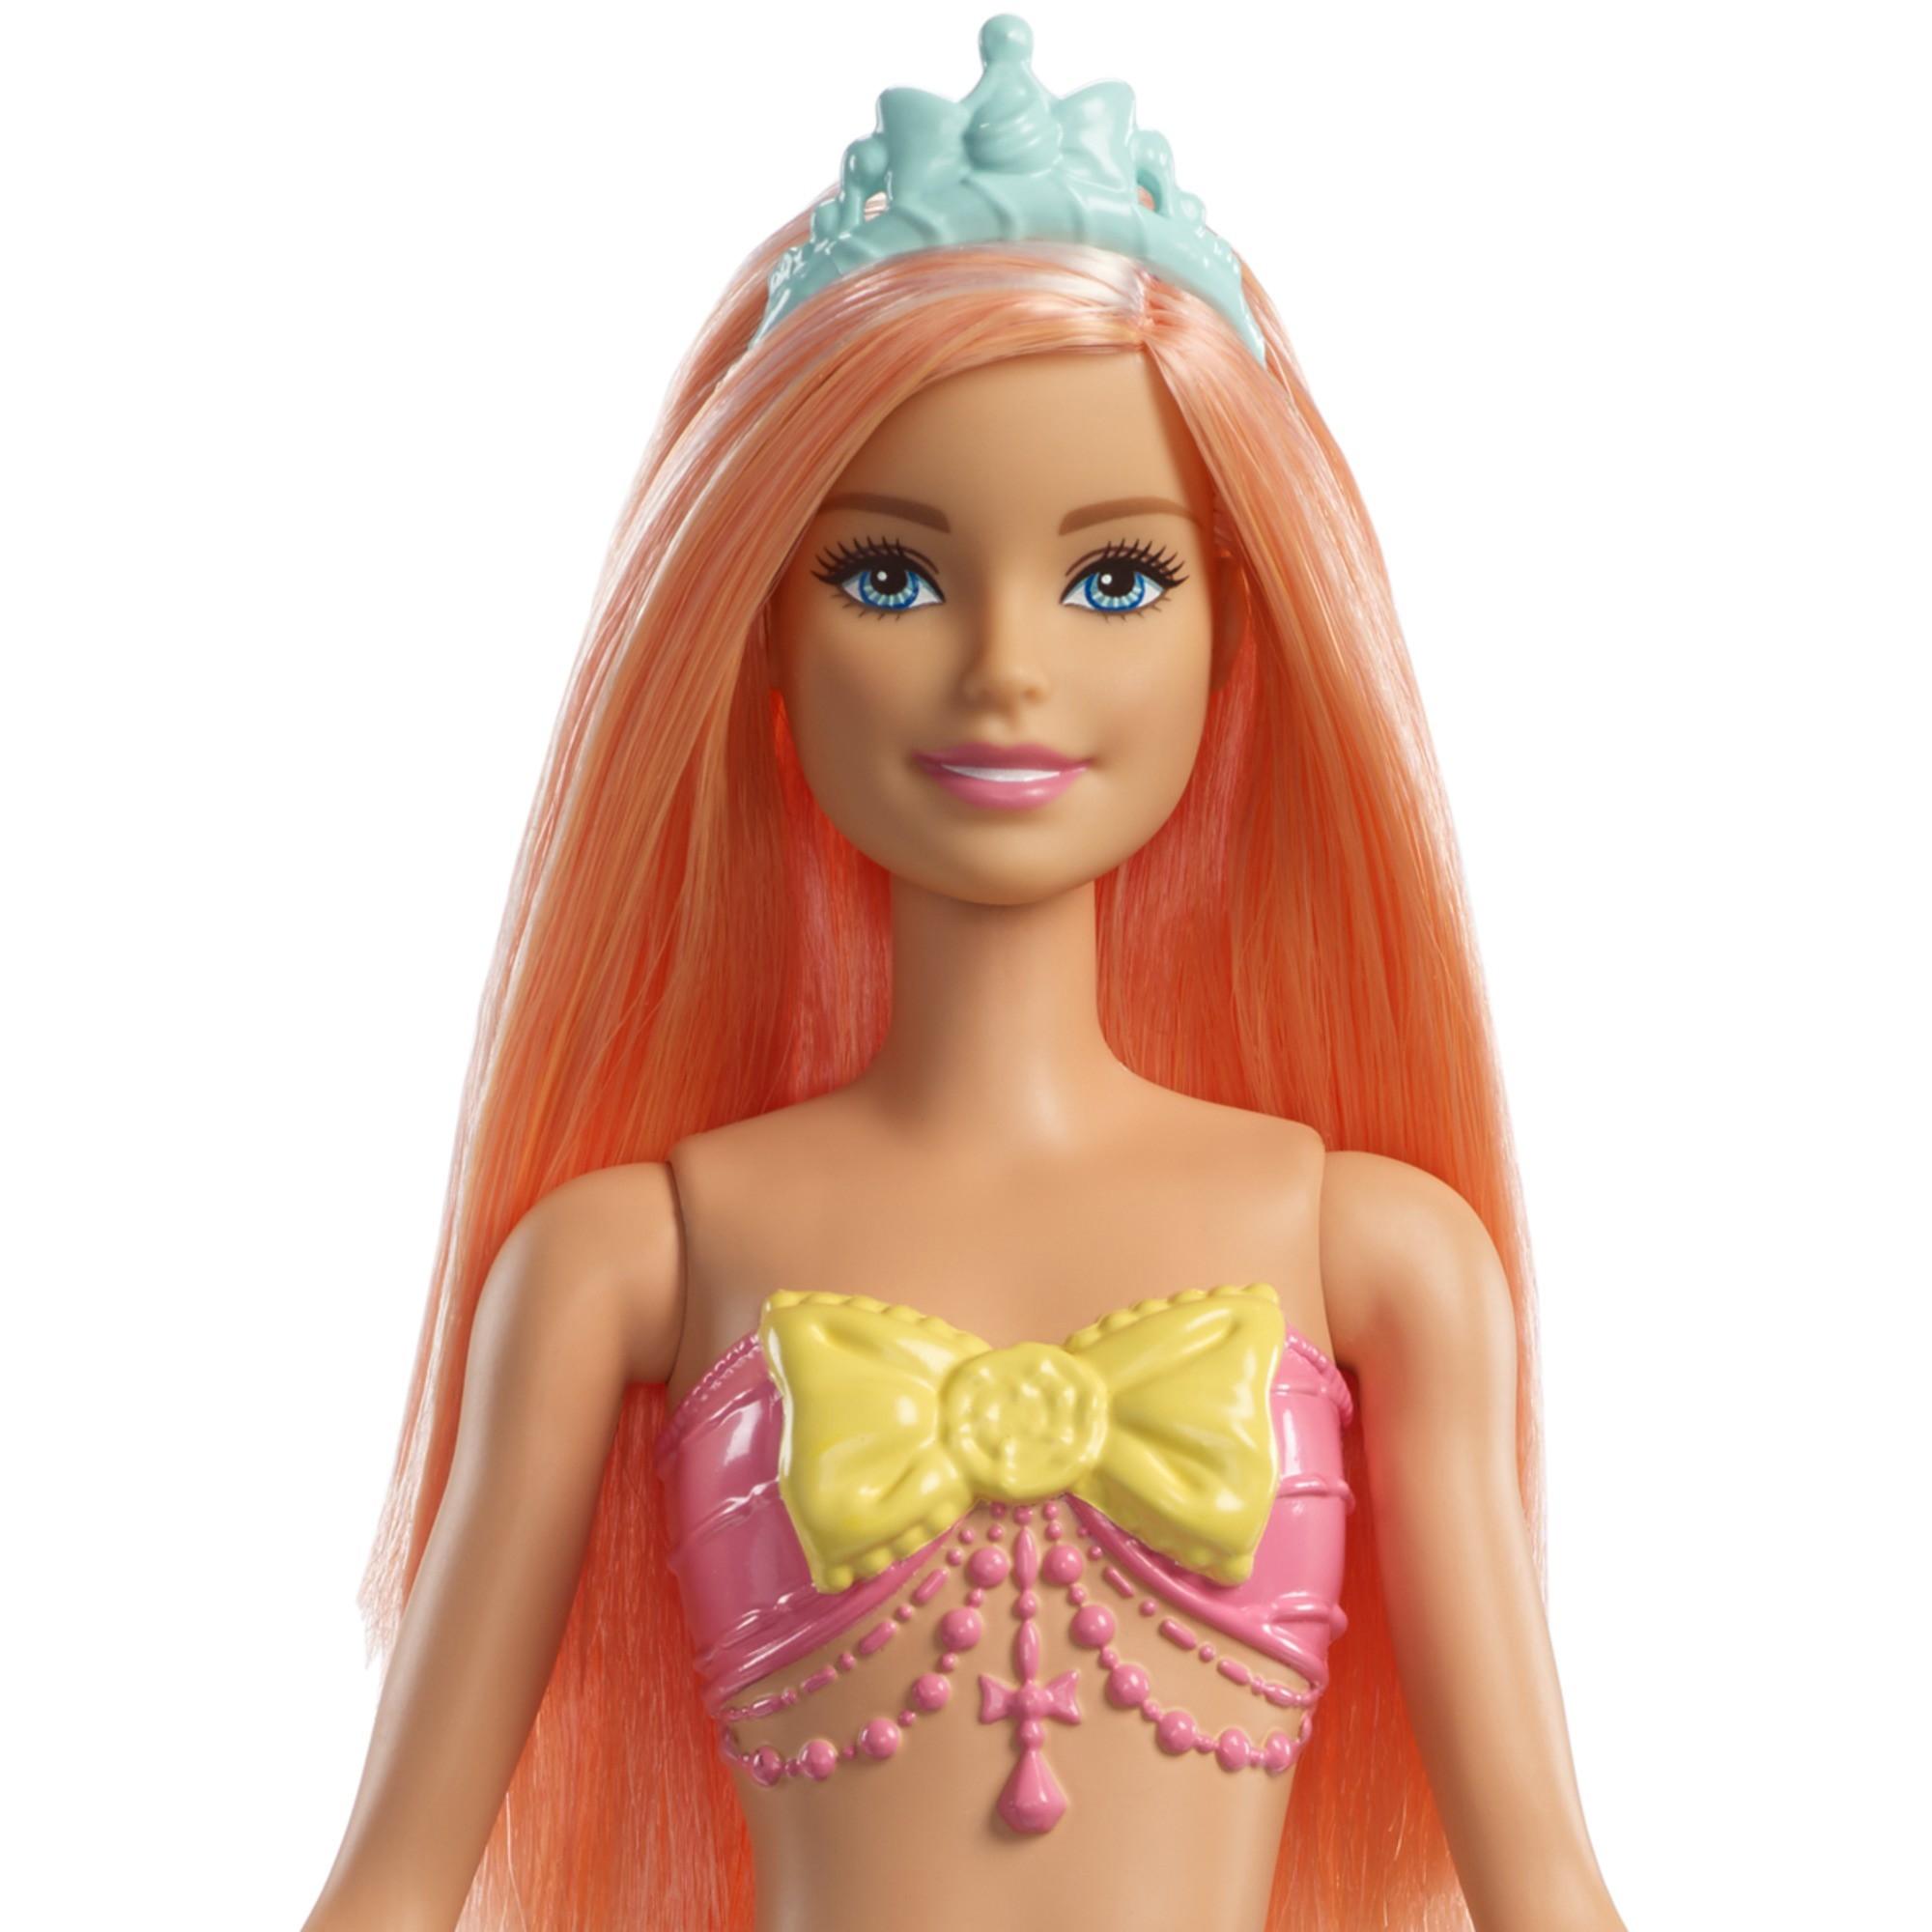 Barbie Dreamtopia Mermaid Doll with Long Coral Hair - image 5 of 8